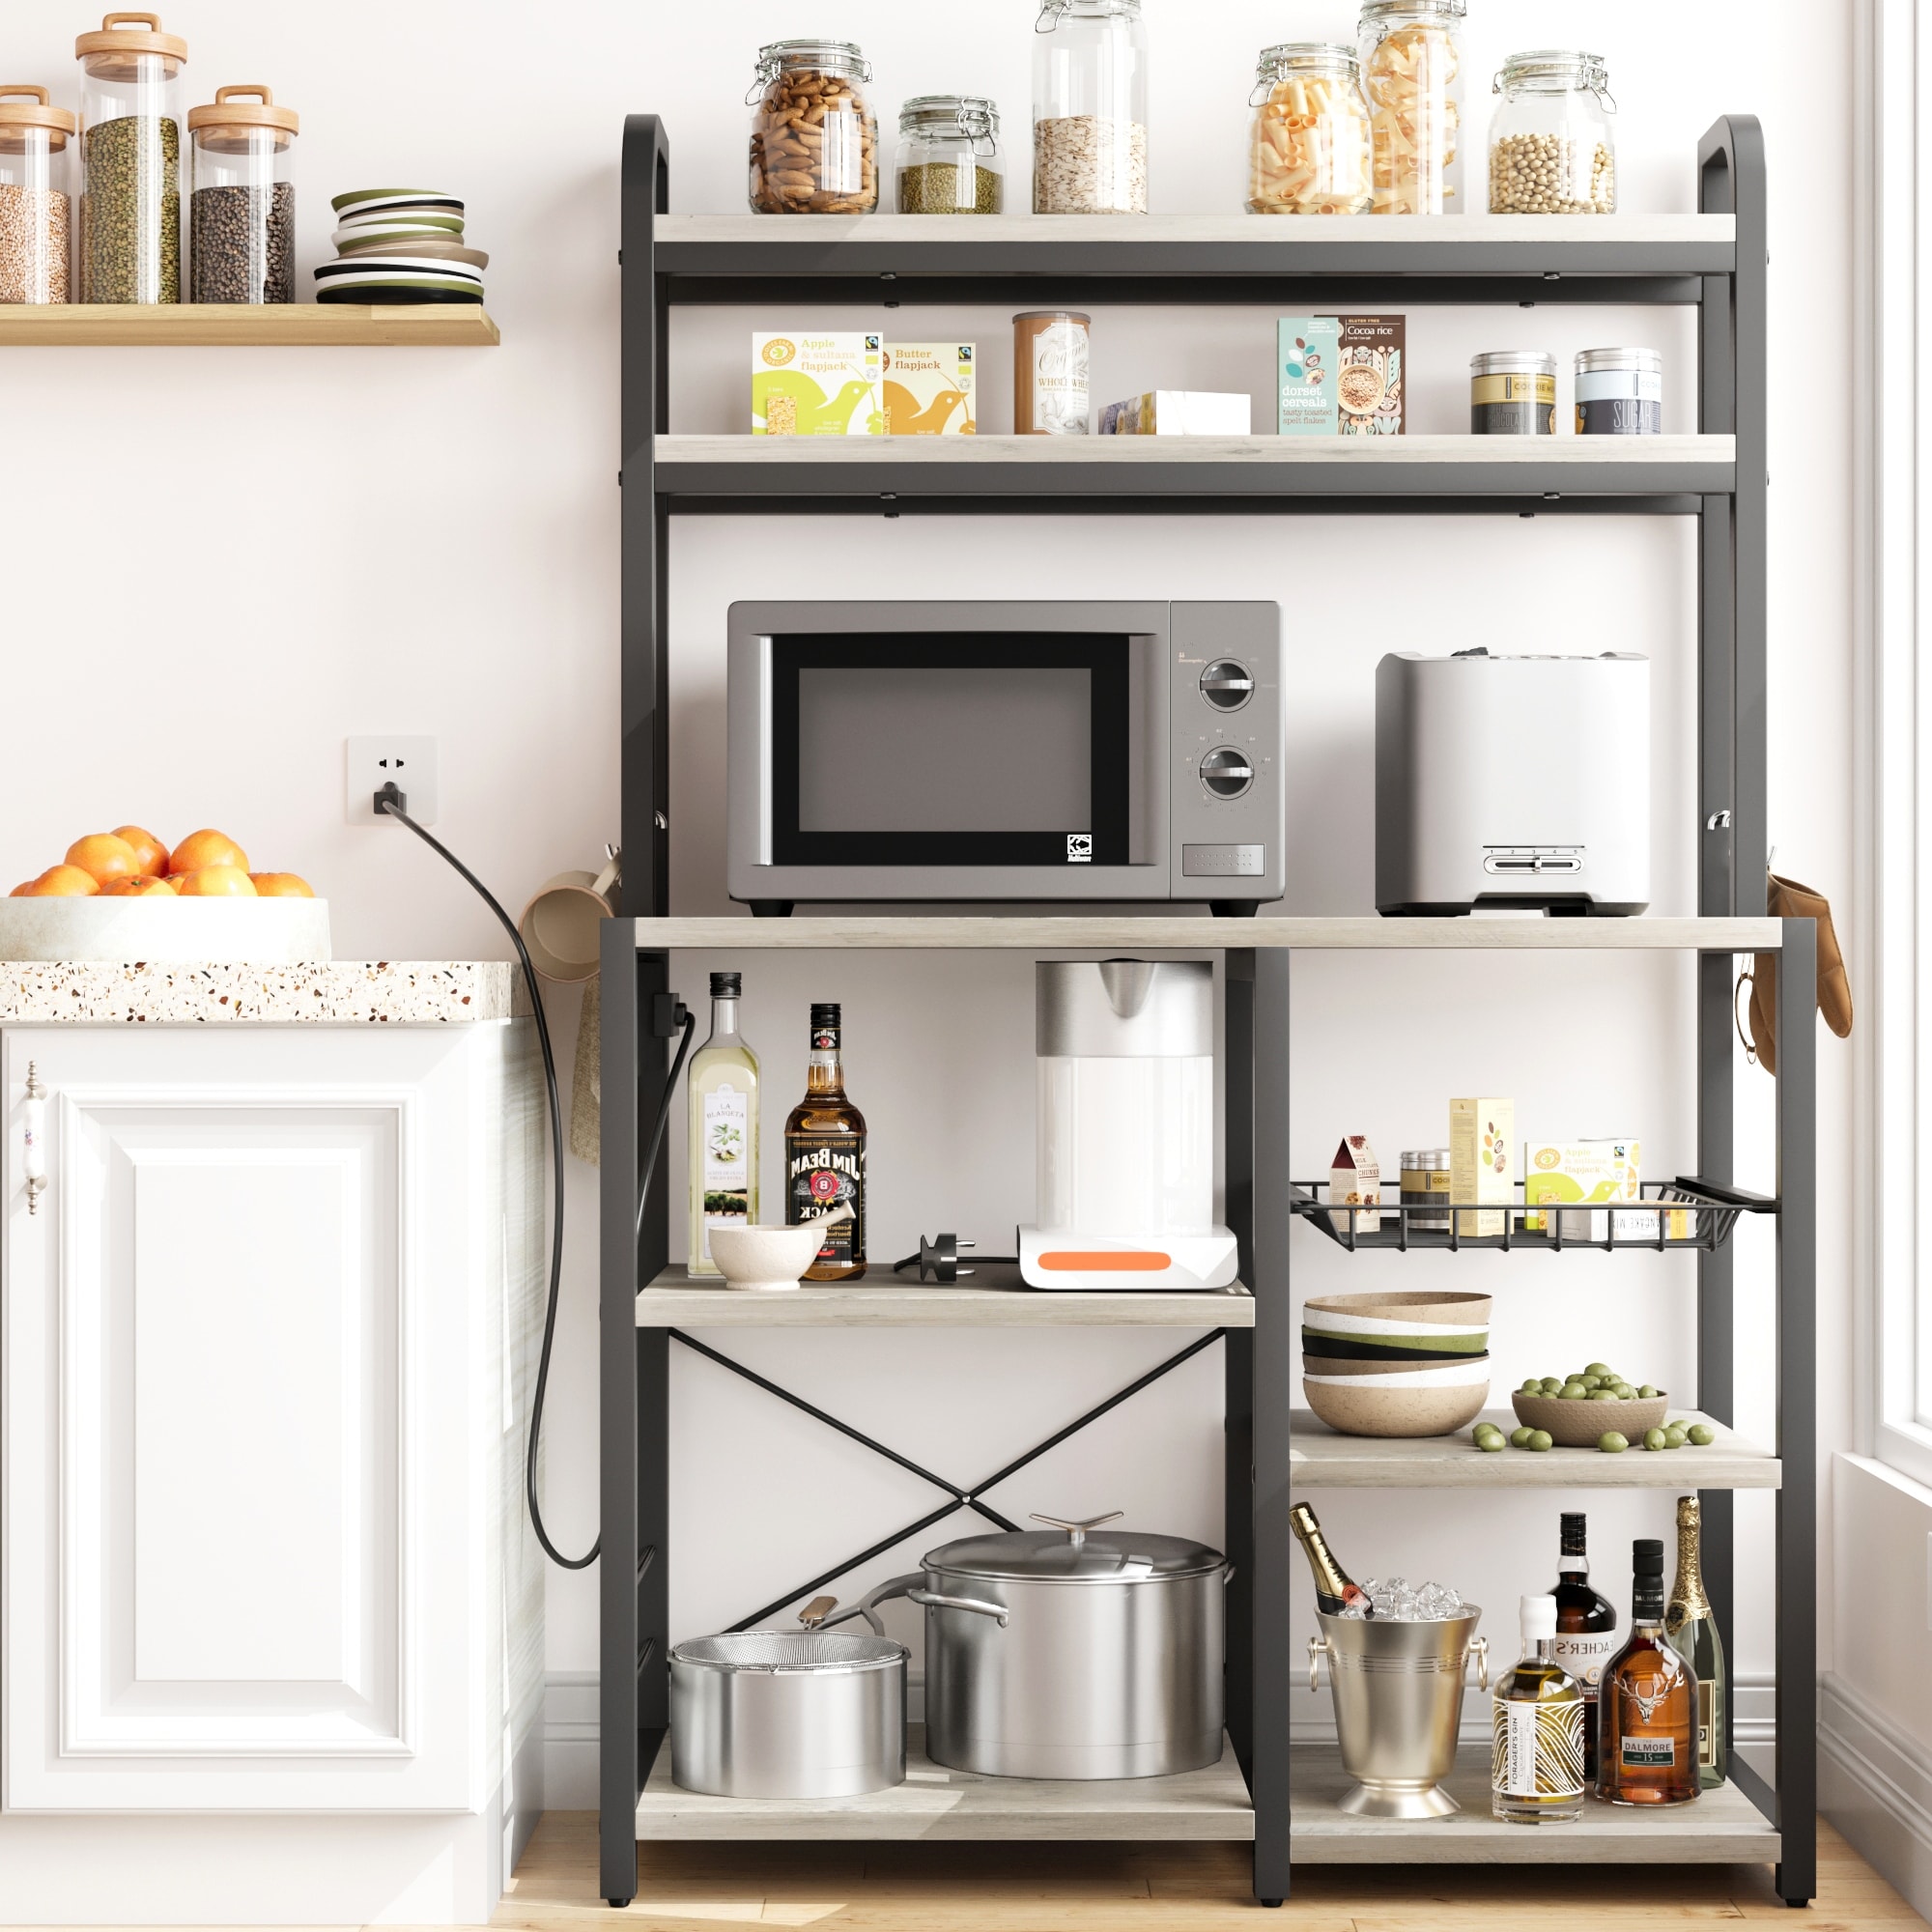 https://ak1.ostkcdn.com/images/products/is/images/direct/0bff8a82fba0660da9b5fa10c89f1dc9b216b8fb/6-Tier-Kitchen-Bakers-Rack-Utility-Storage-Shelf-Microwave-Oven-Stand-Kitchen-Stand-with-Hutch.jpg